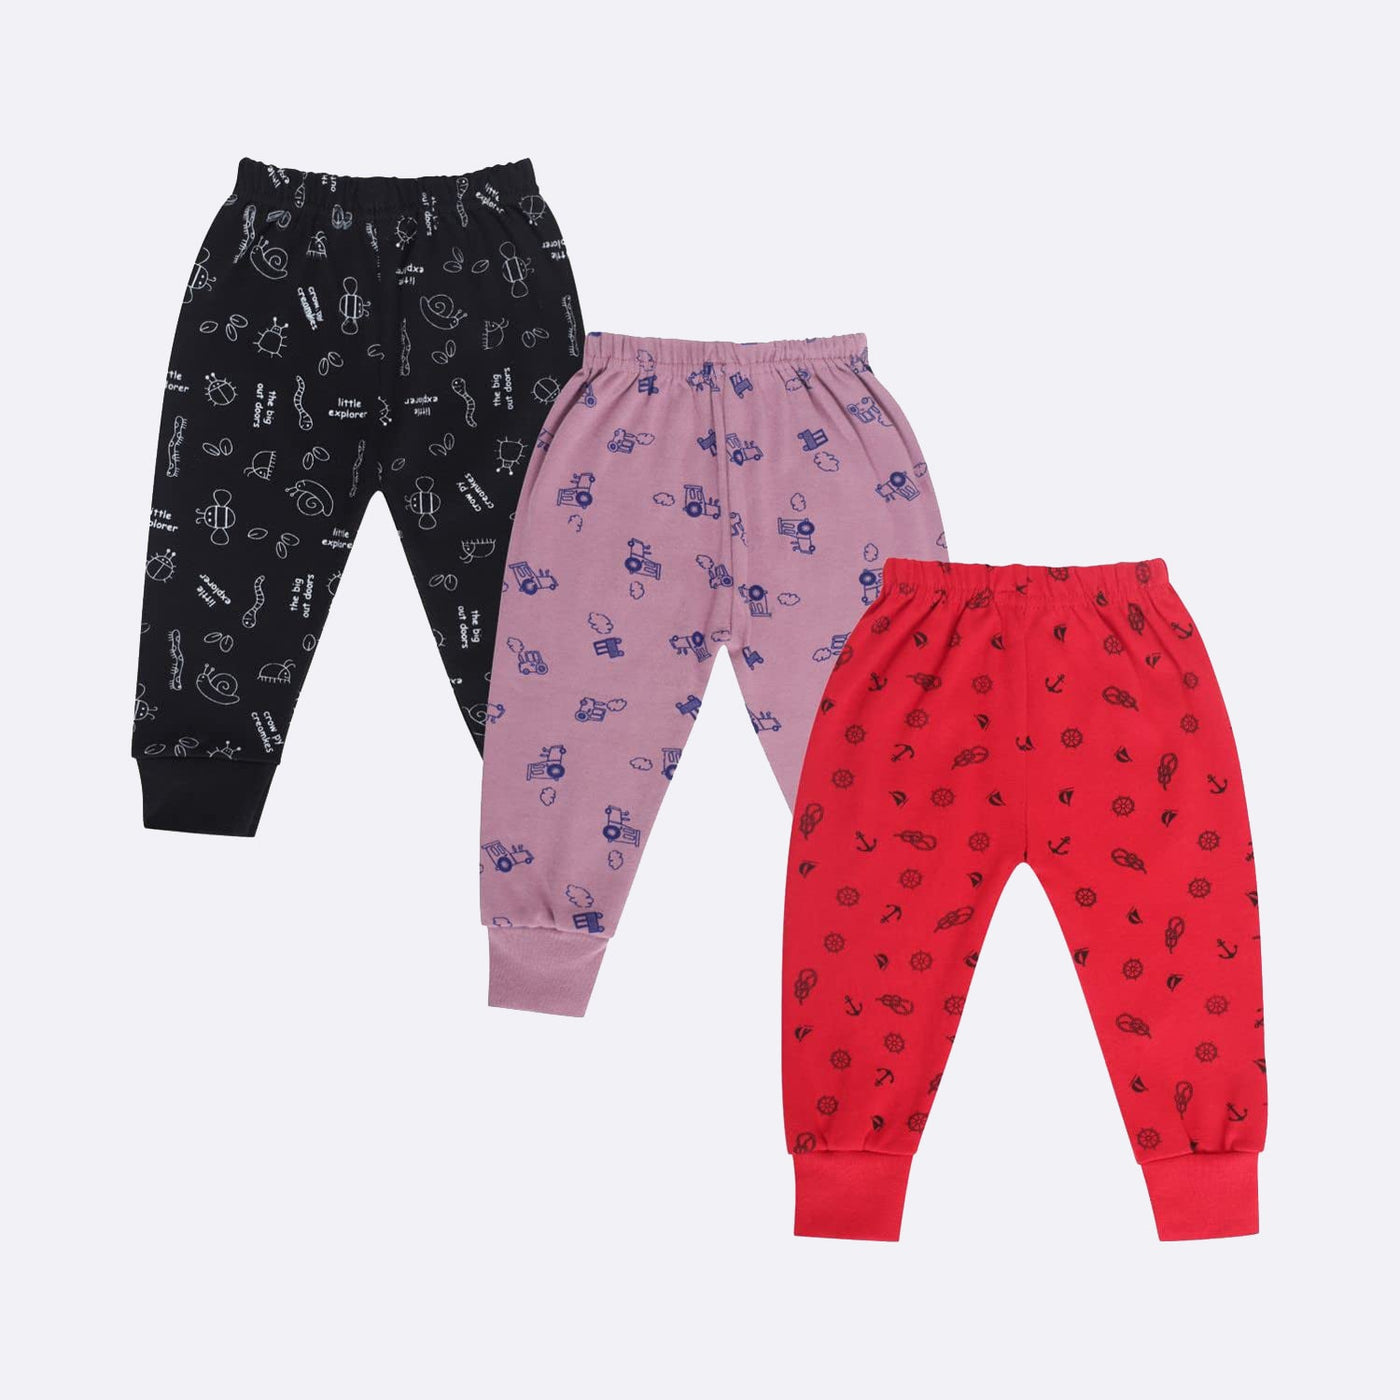 Feather Touch Dark Colors Unisex Pyjamas Pack